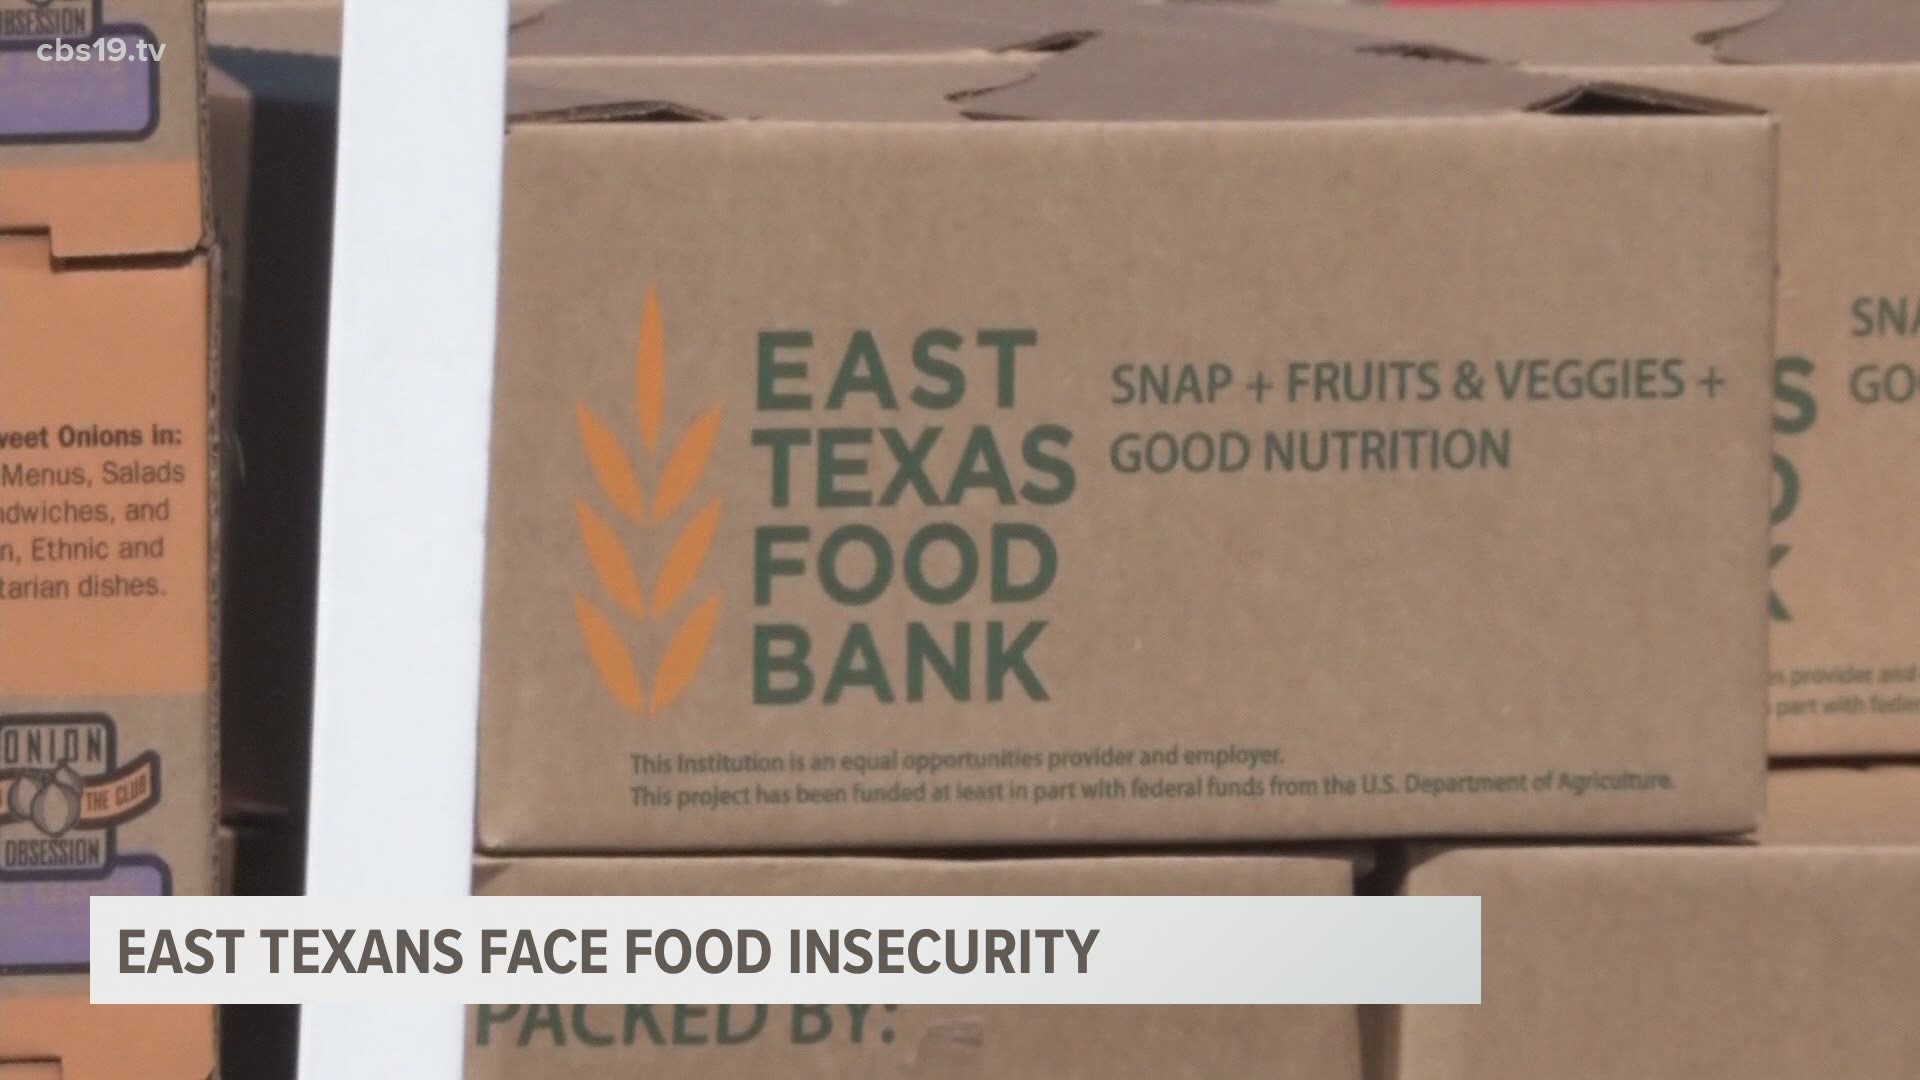 Food insecurity is a major concern all over the country, including here at home.